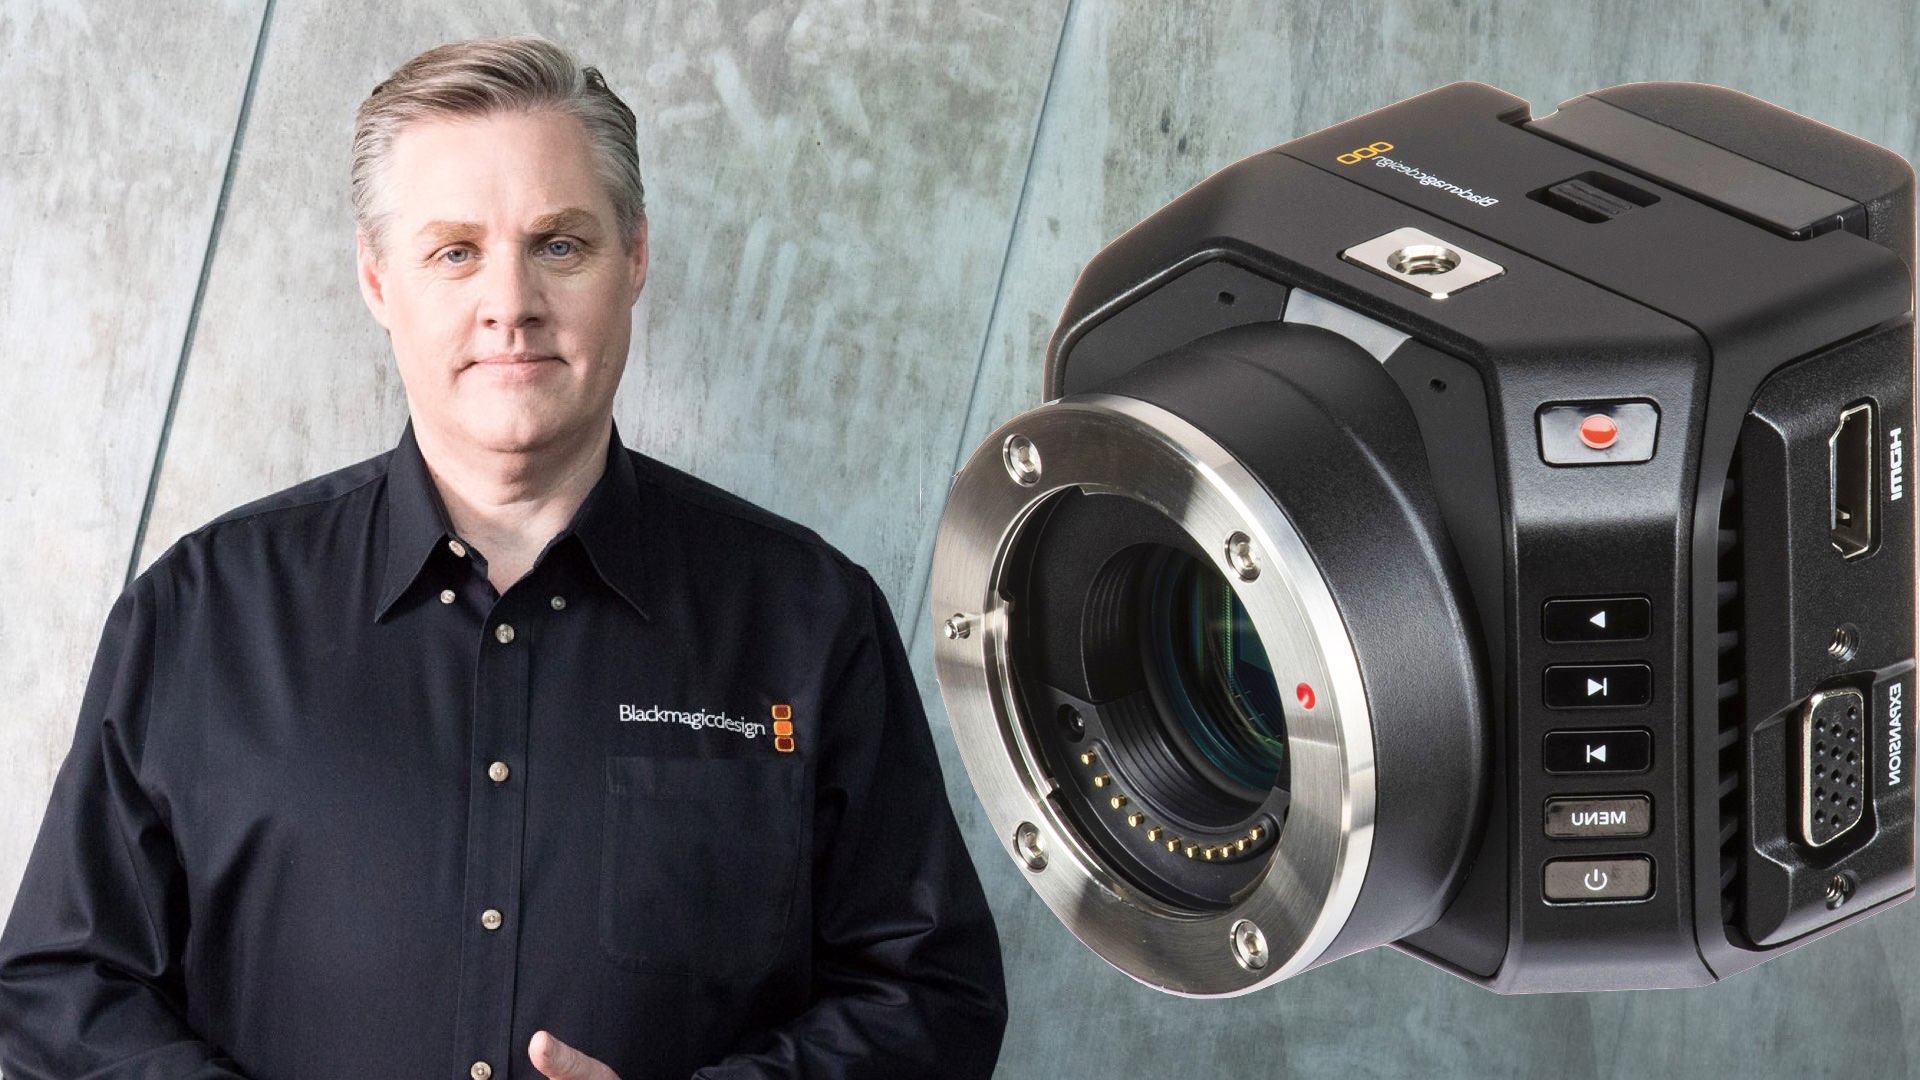 Blackmagic CEO: “We're aggressively increasing our investment in